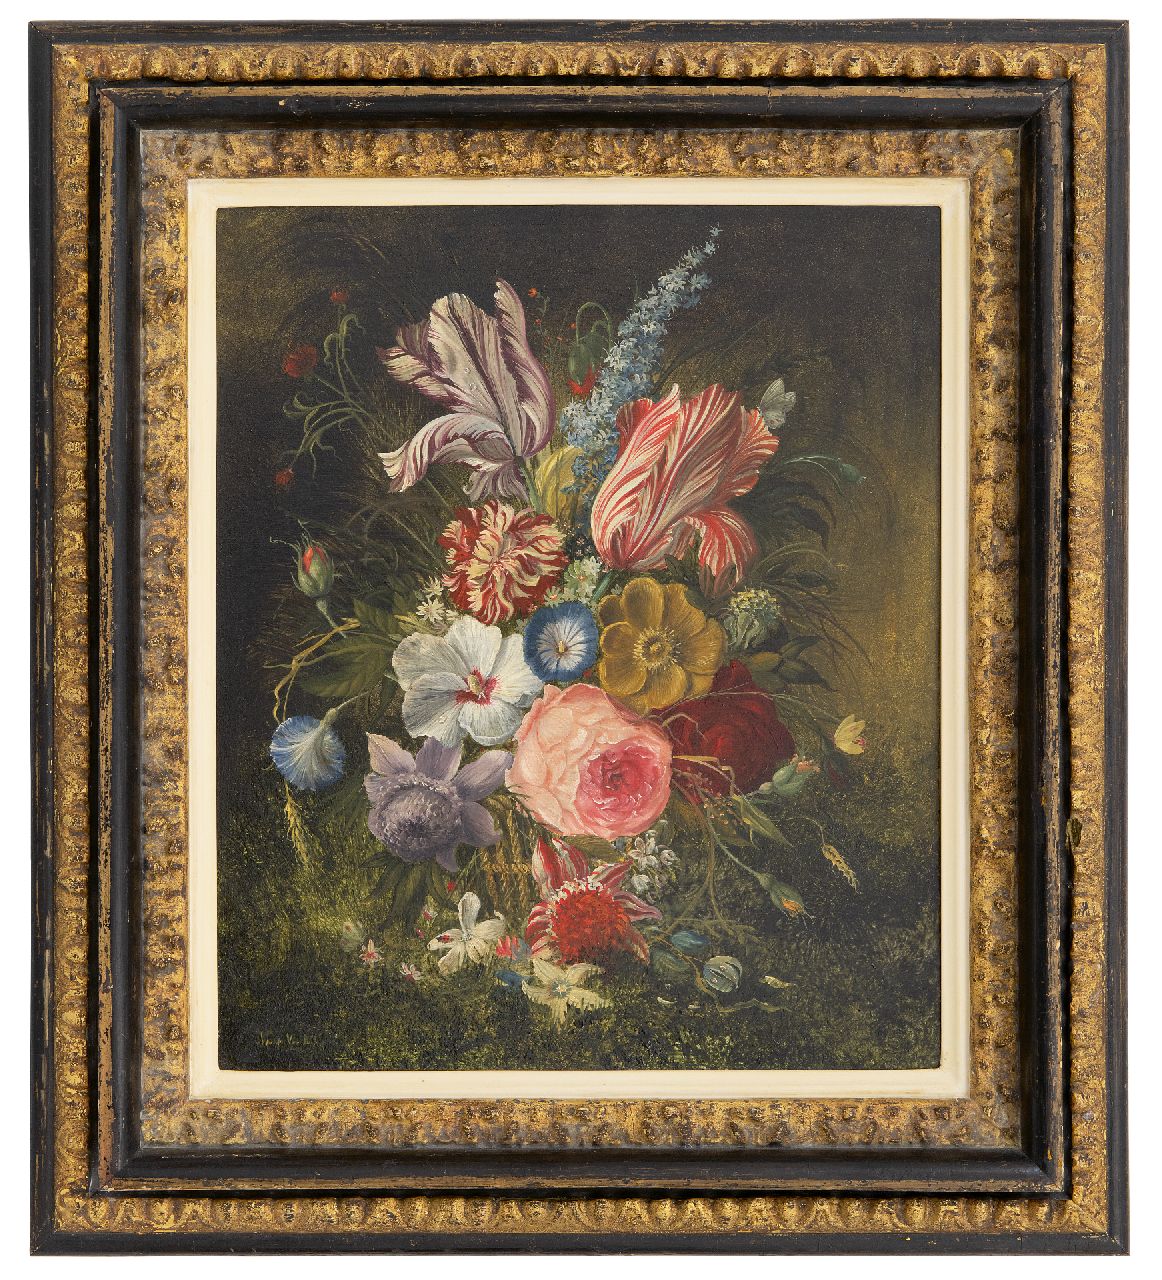 Hollandse School, 19e eeuw   | Hollandse School, 19e eeuw, Still life with flowers, oil on copper 35.7 x 29.9 cm, signed l.l. (unreadable)